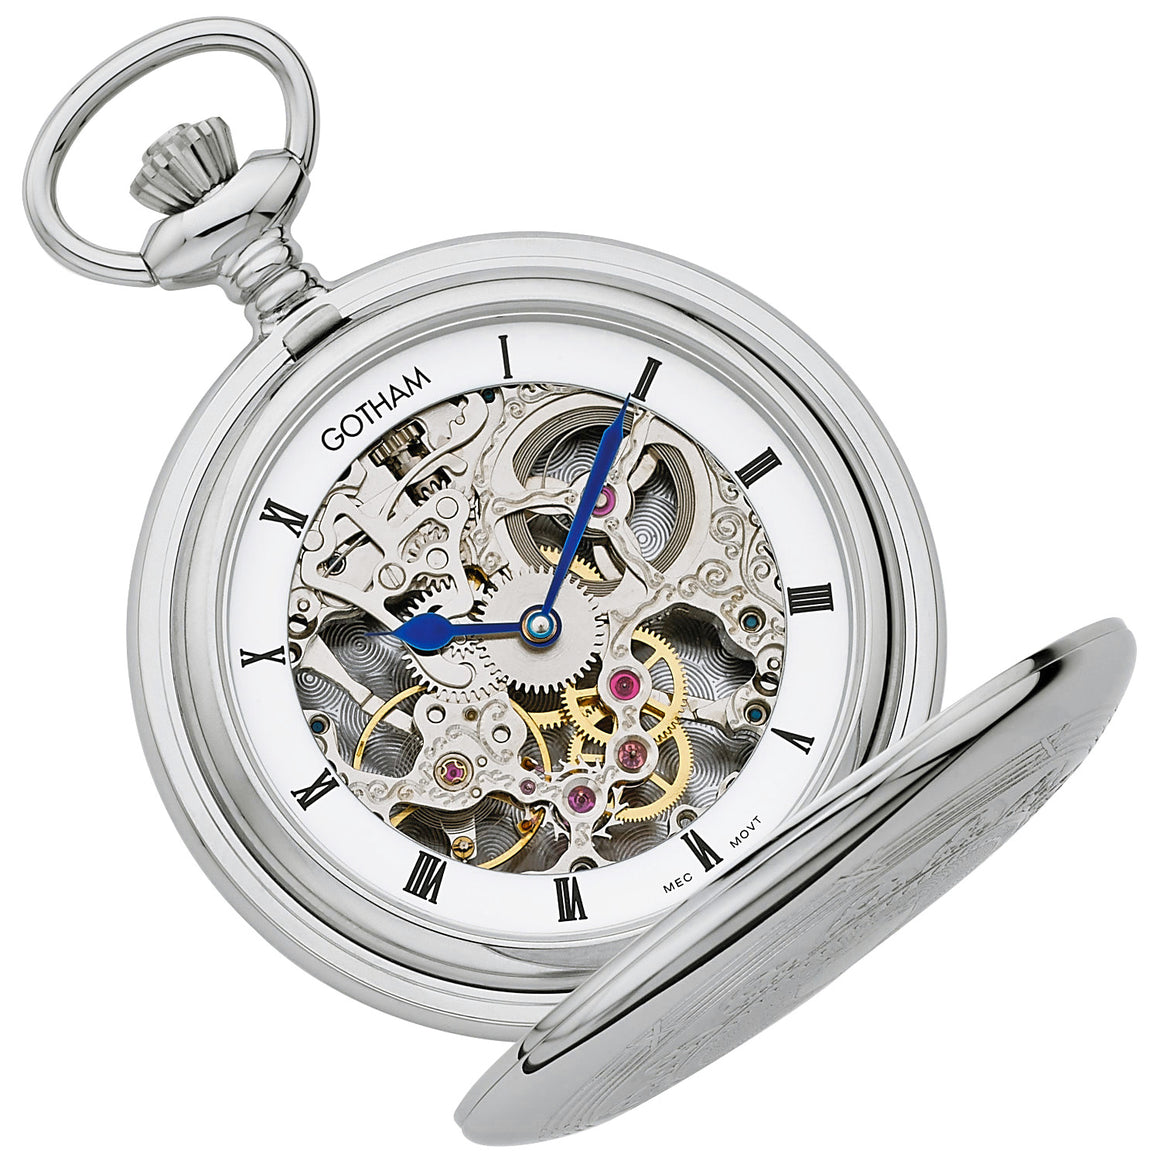 Gotham Men's Silver-Tone Double Cover Exhibition Mechanical Pocket Watch # GWC18800S